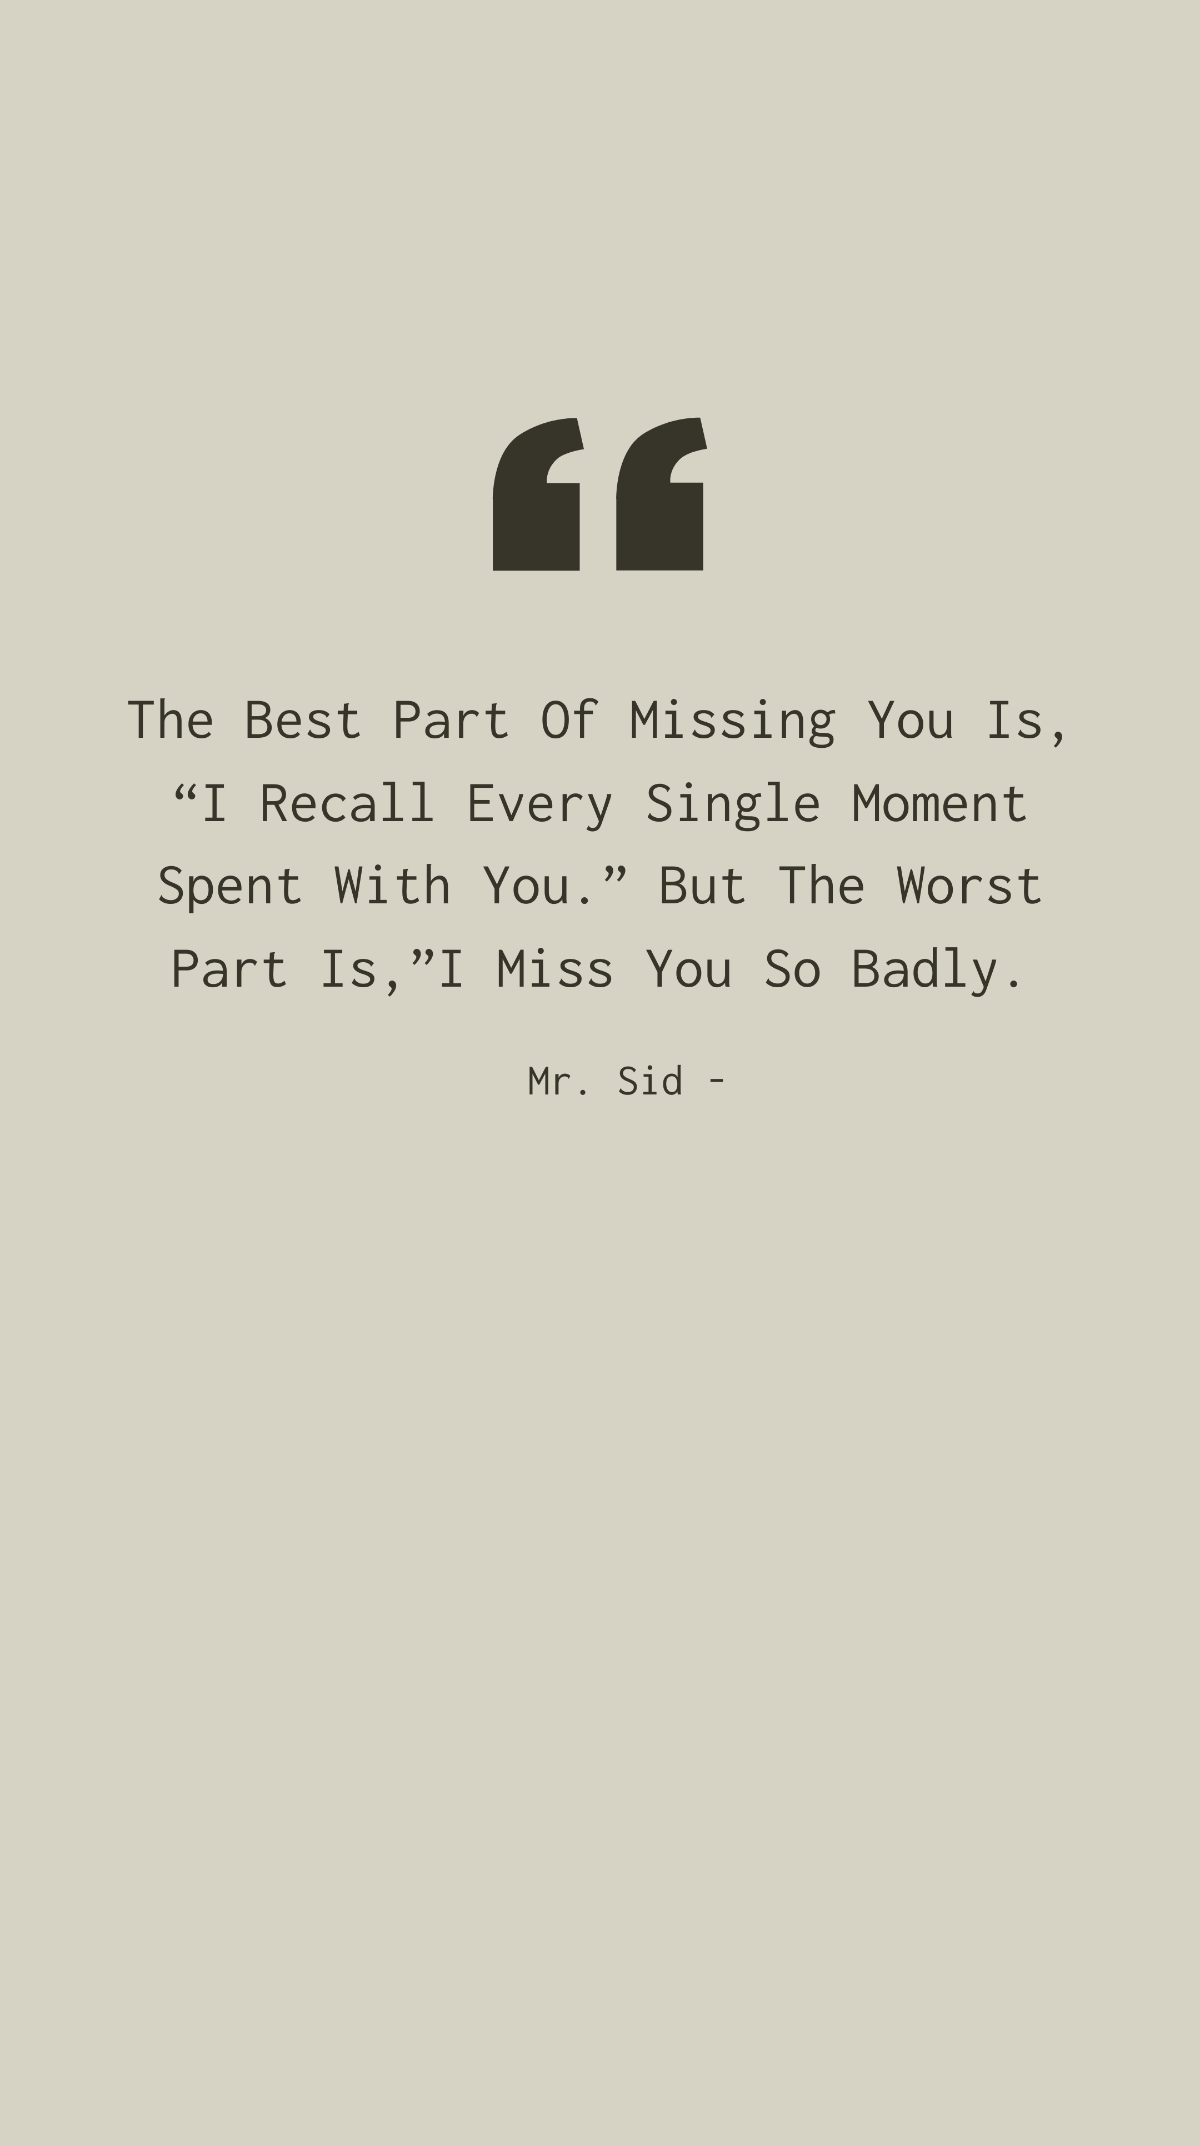 Mr. Sid - The Best Part Of Missing You Is, “I Recall Every Single Moment Spent With You.” But The Worst Part Is,”I Miss You So Badly. Template